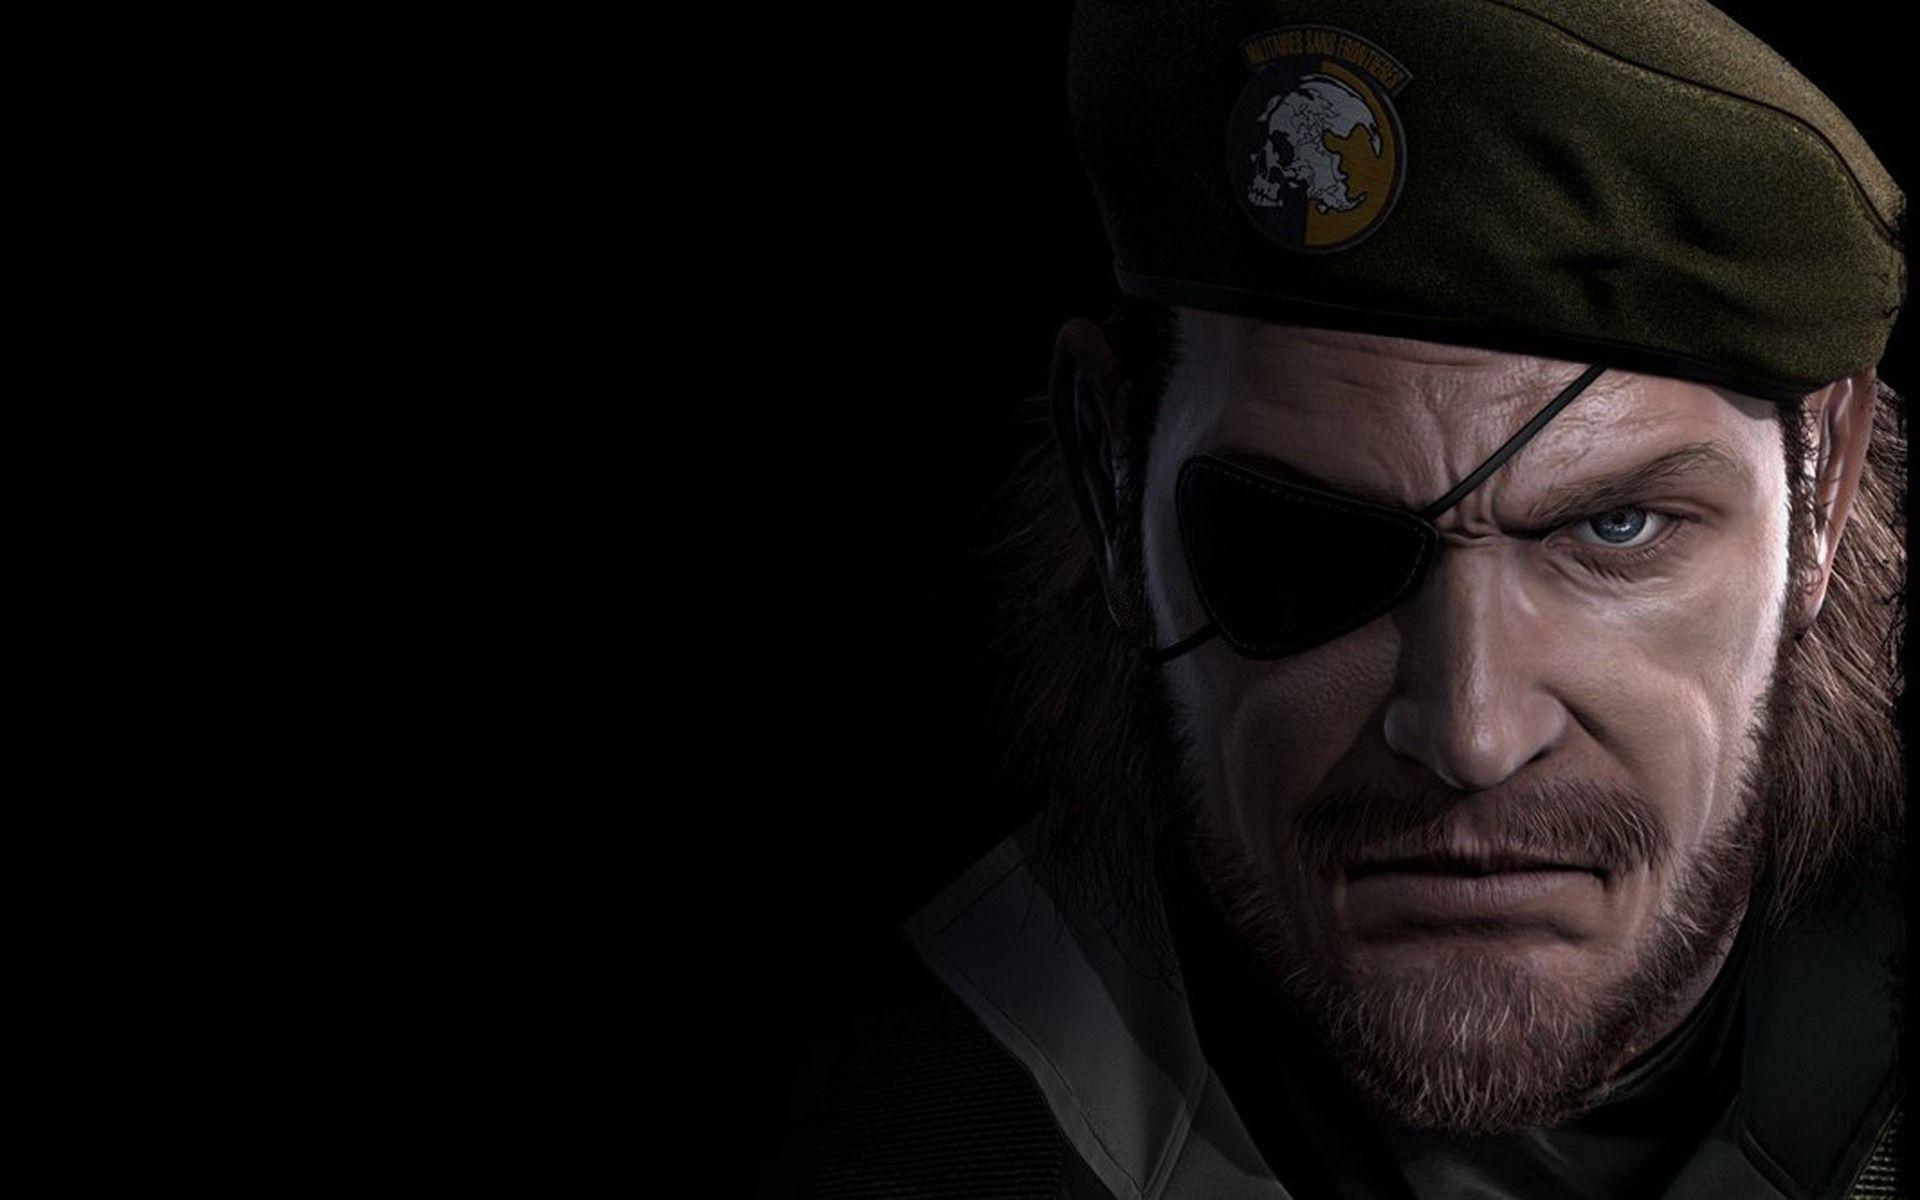 Wallpaper Abyss Everything Metal Gear Solid Vi HD Game 1920x1080PX